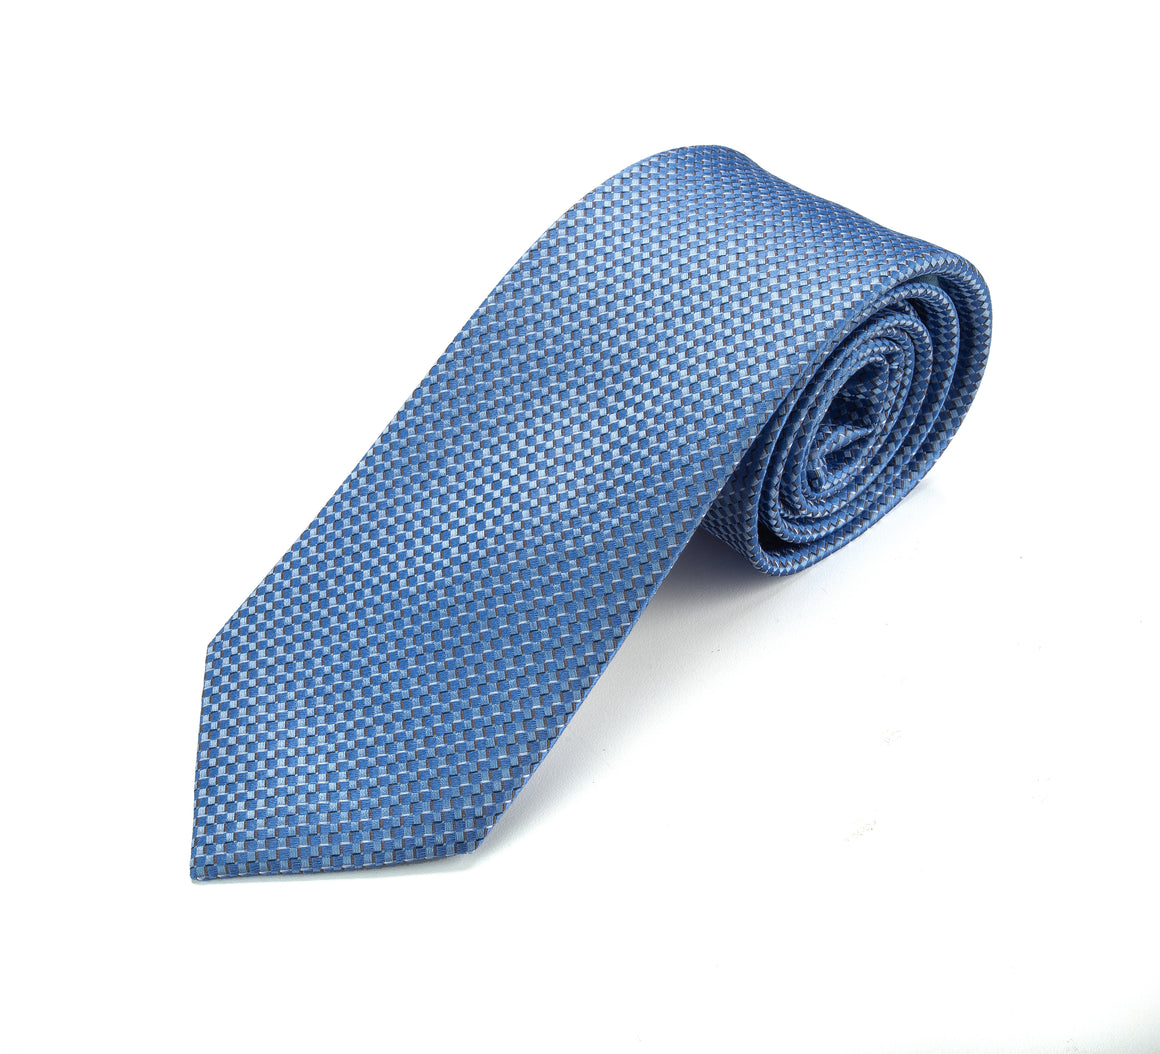 Achieve a timeless, professional look with this impeccably crafted tie | 1476